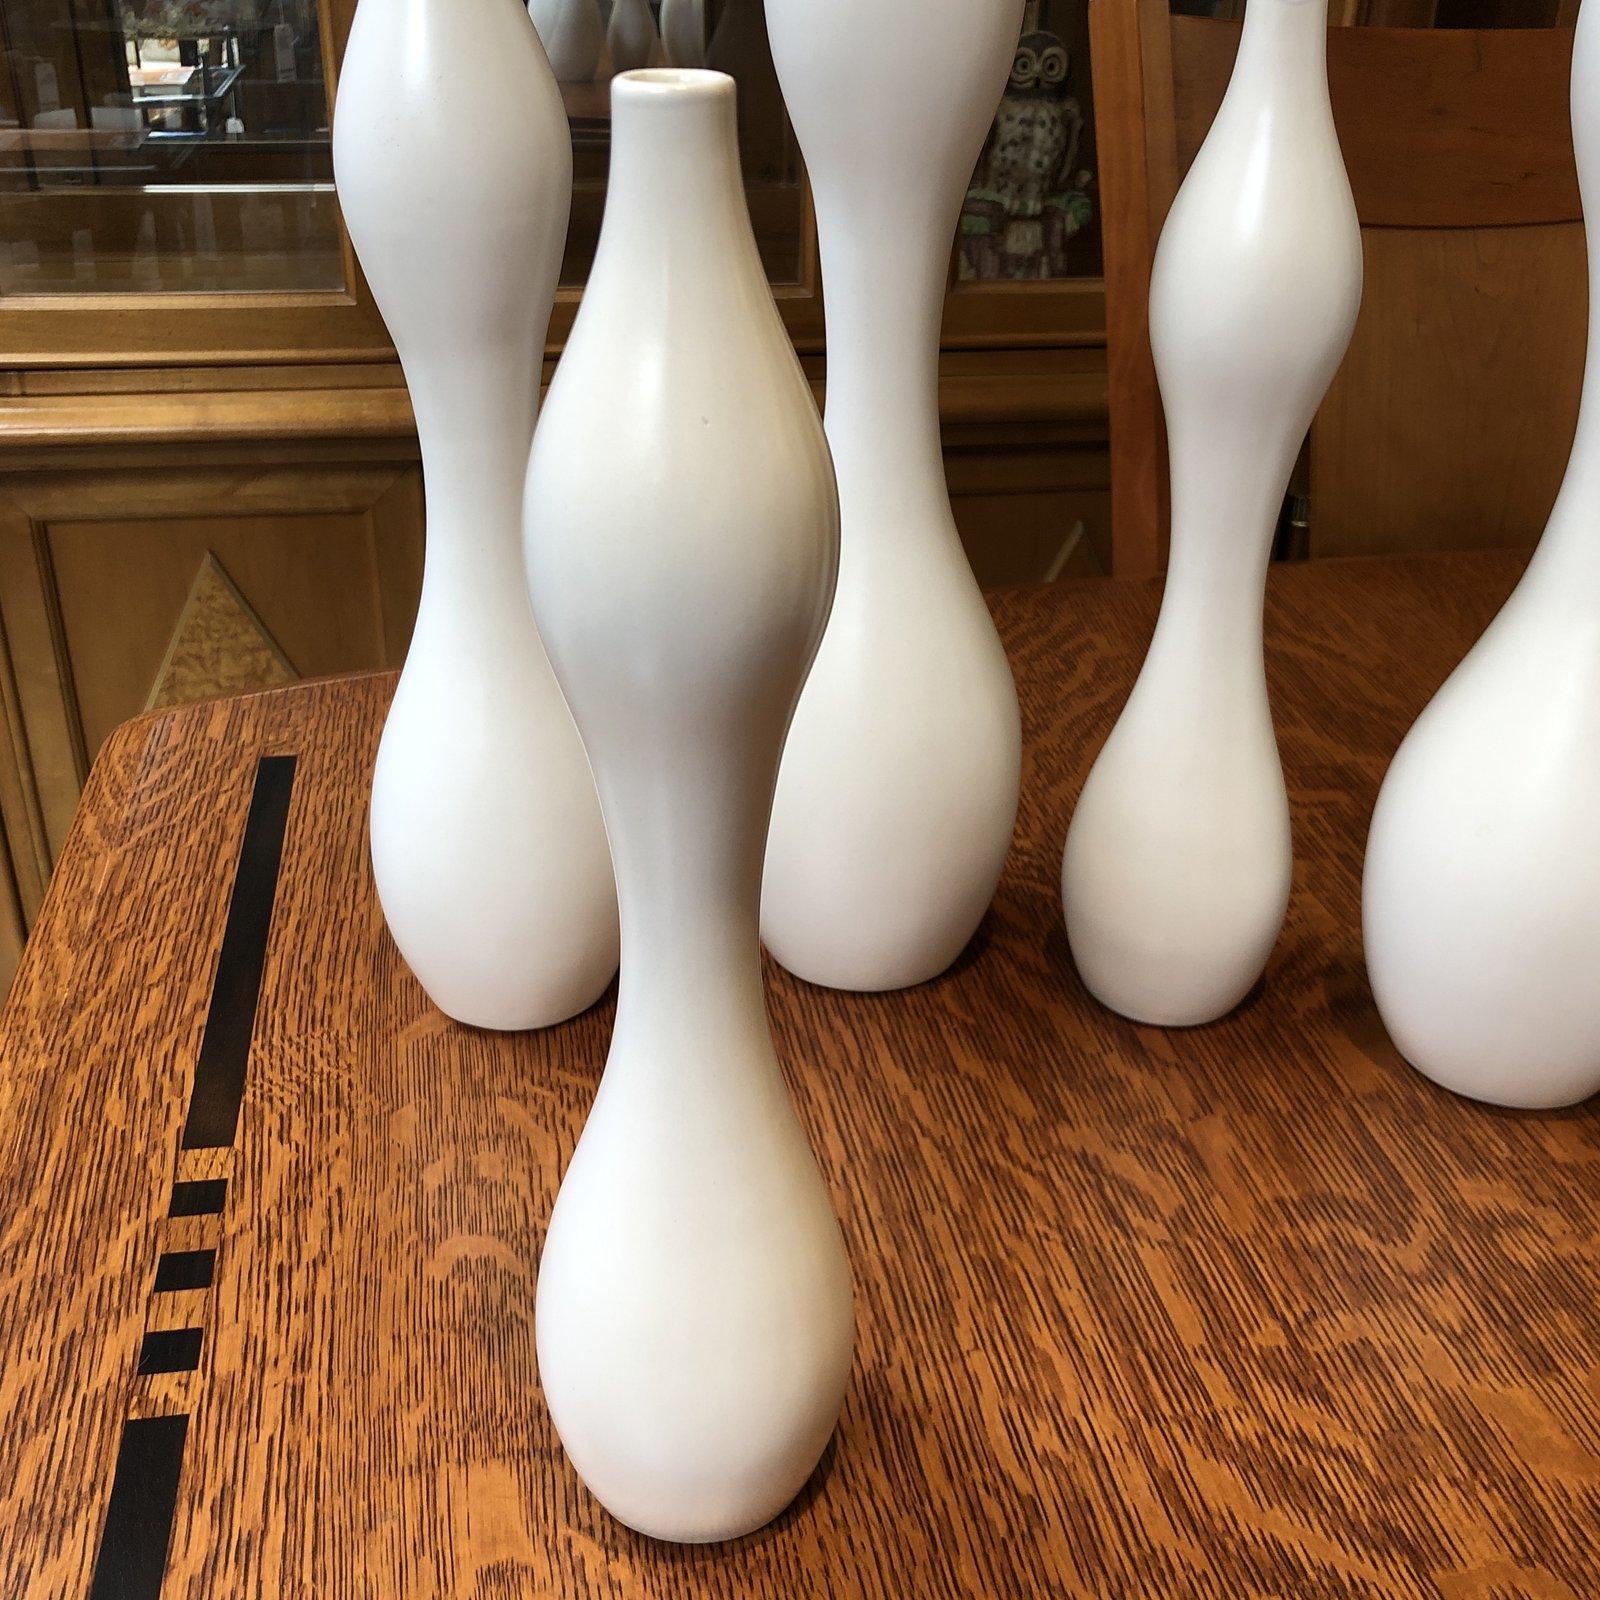 A collection of vases from Jonathan Adler. An undulating multi-height set of seven, these beautiful vessels are immediately identifiable as Jonathan Adler organic designs. Measures: Two are 18